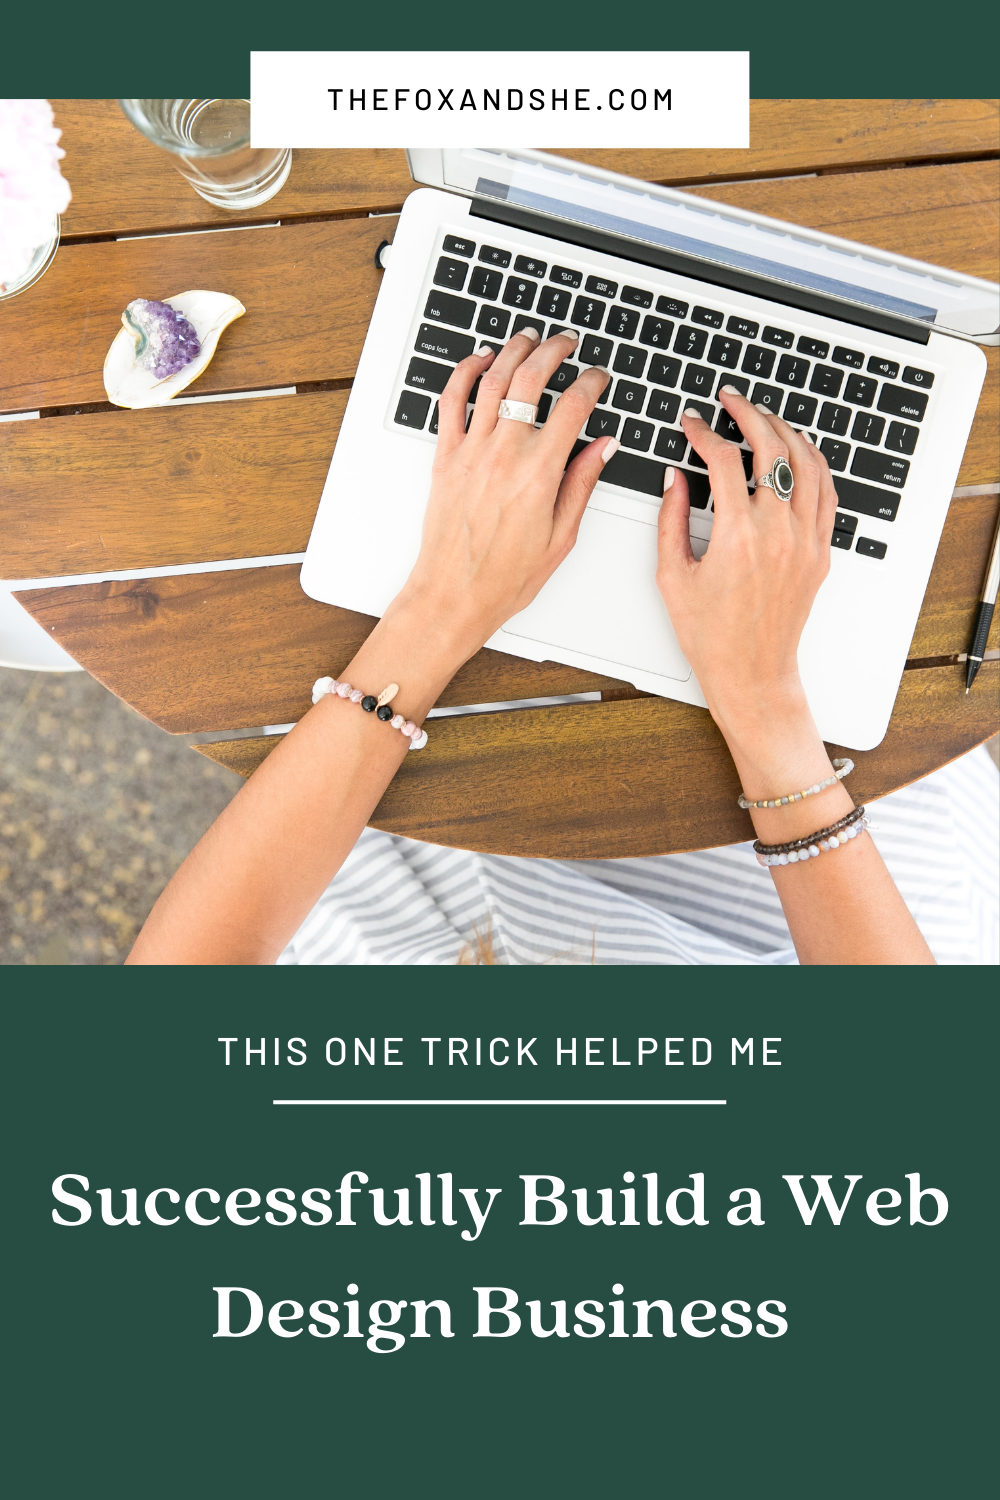 The One thing That Helped Me Successfully Build a Web Design Business | TheFoxandShe.com